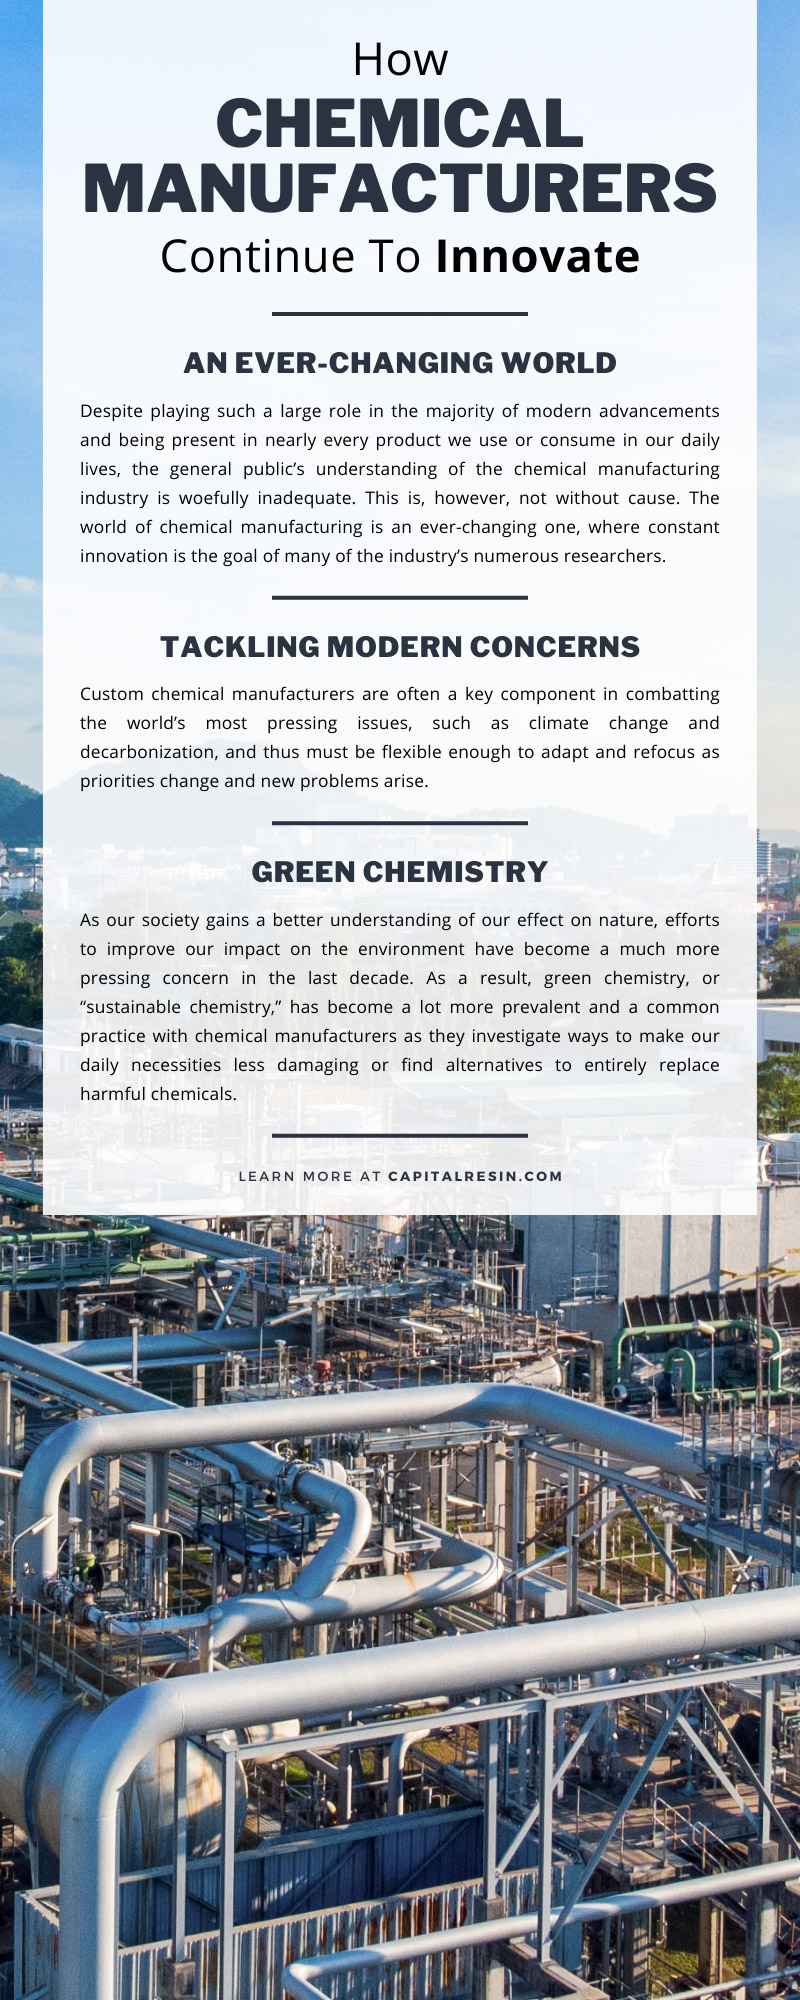 How Chemical Manufacturers Continue To Innovate